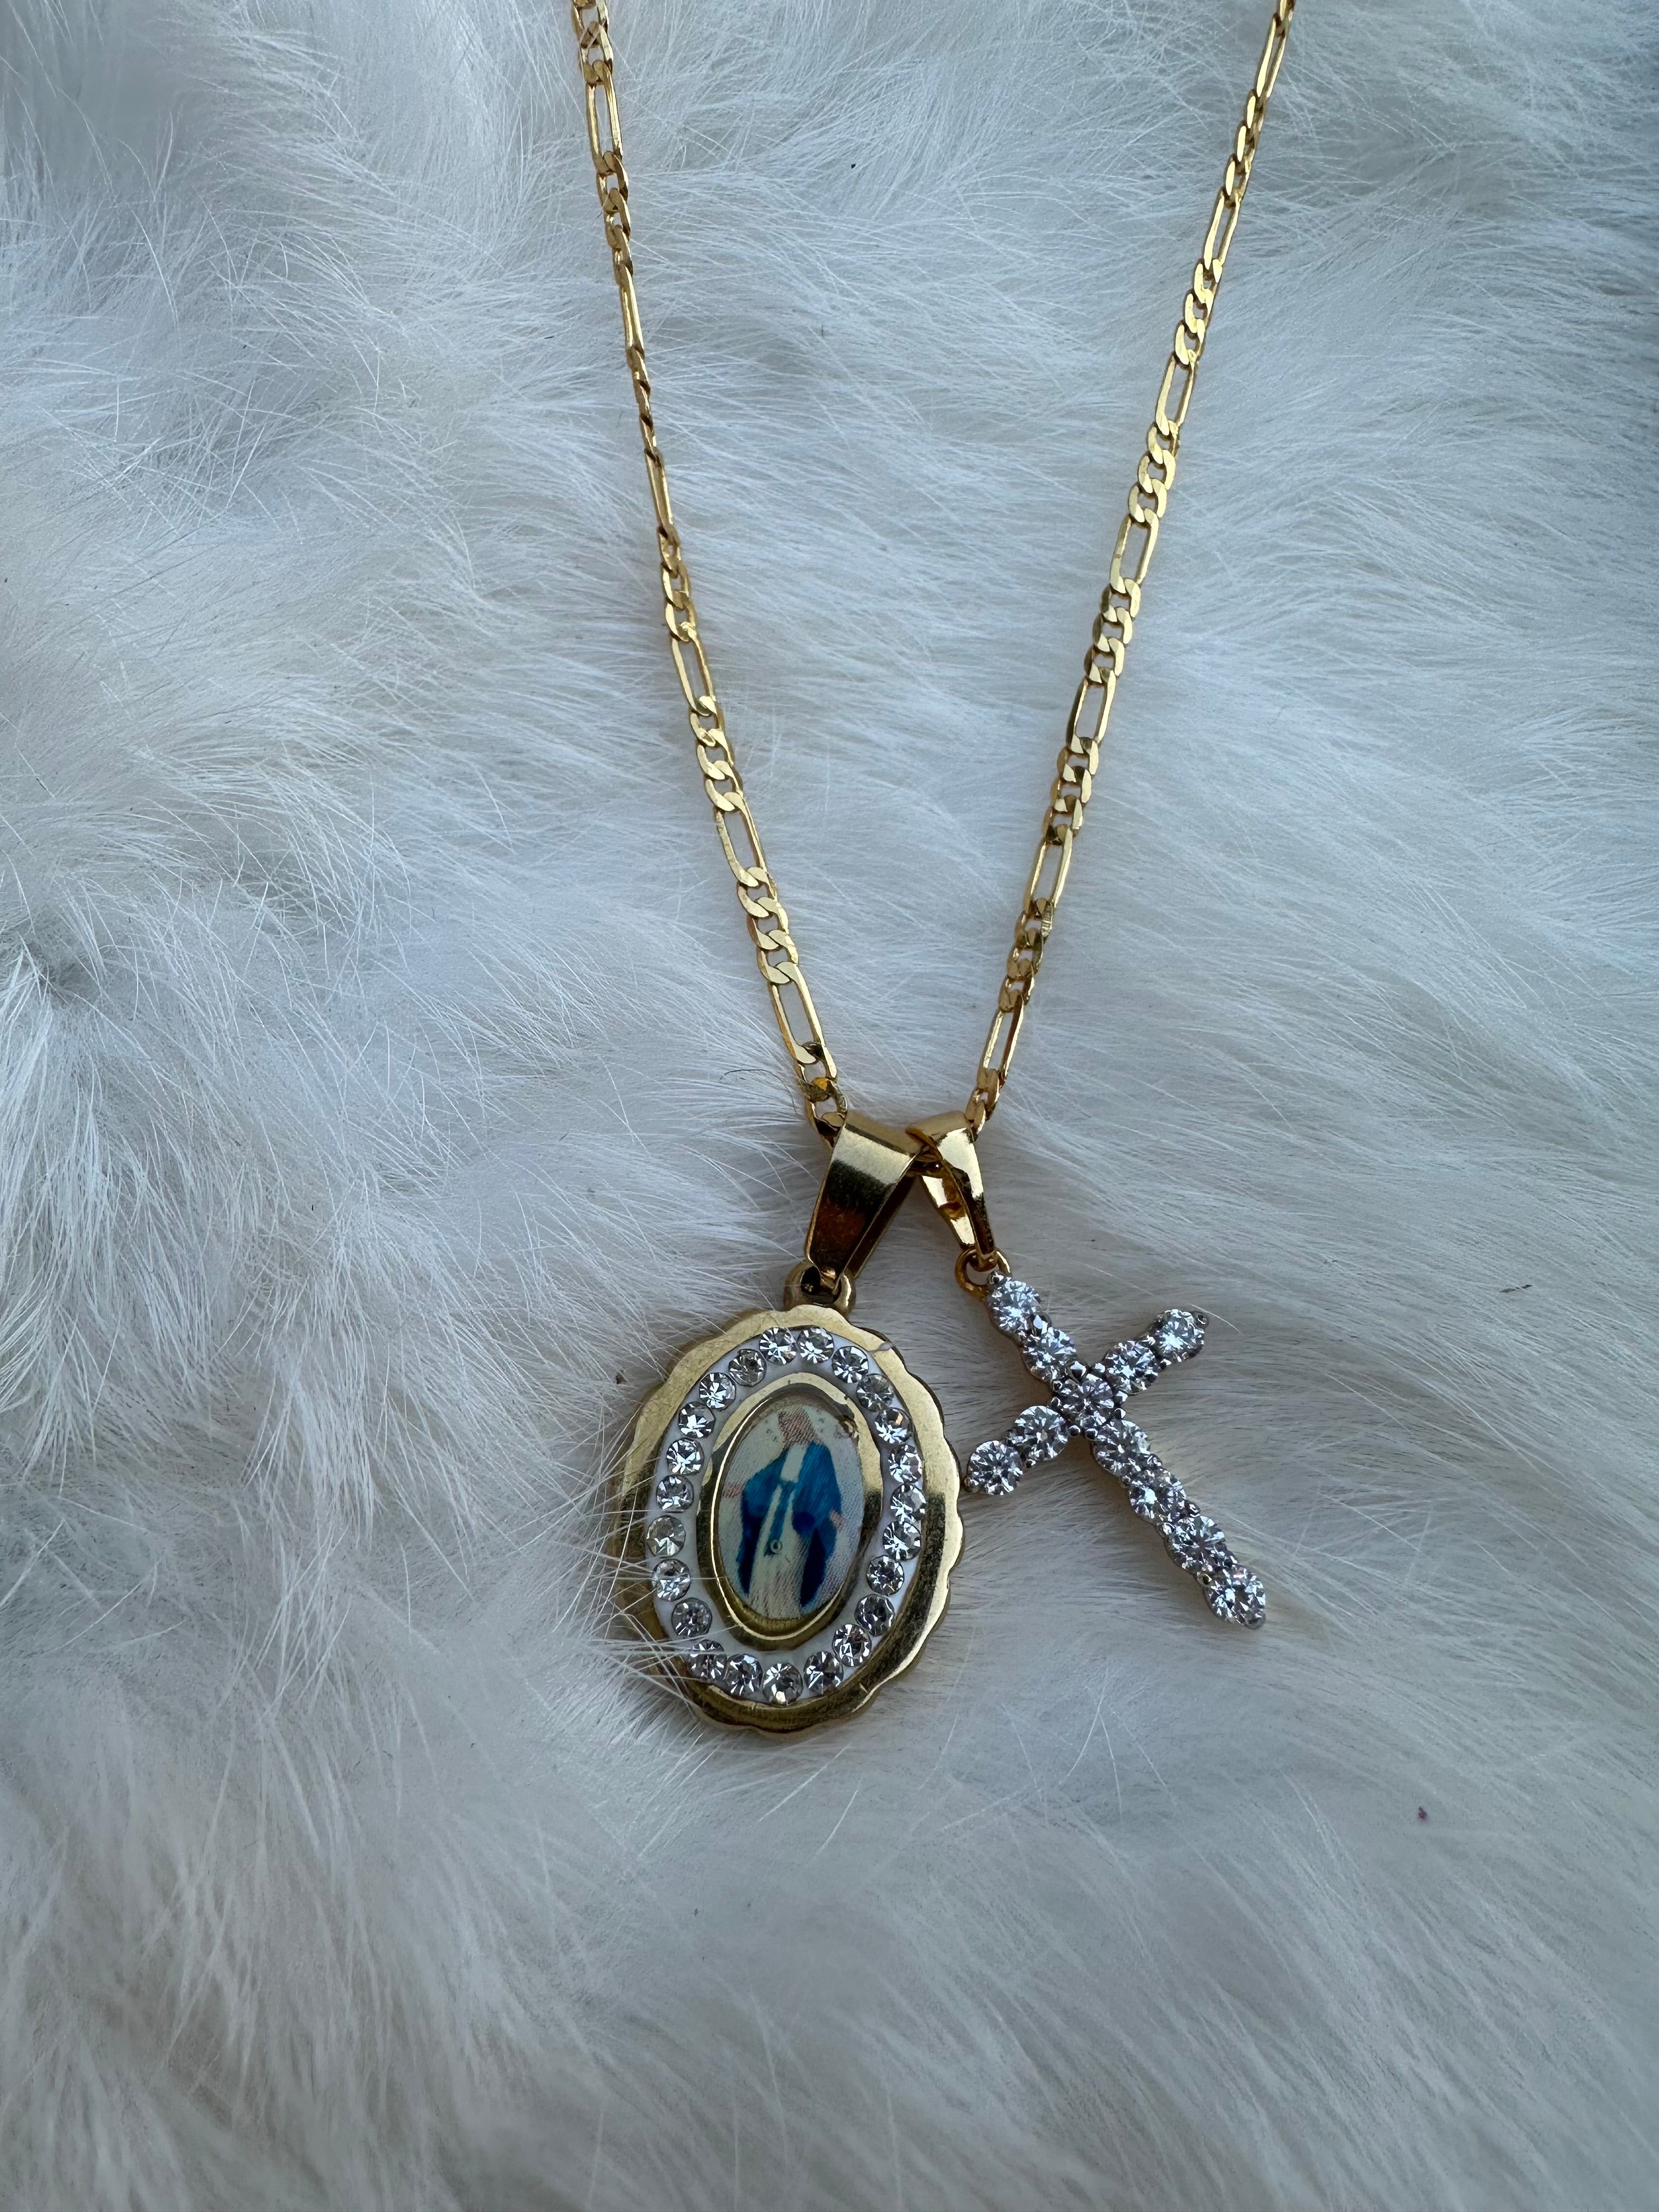 Holy Mother Immaculate Necklace